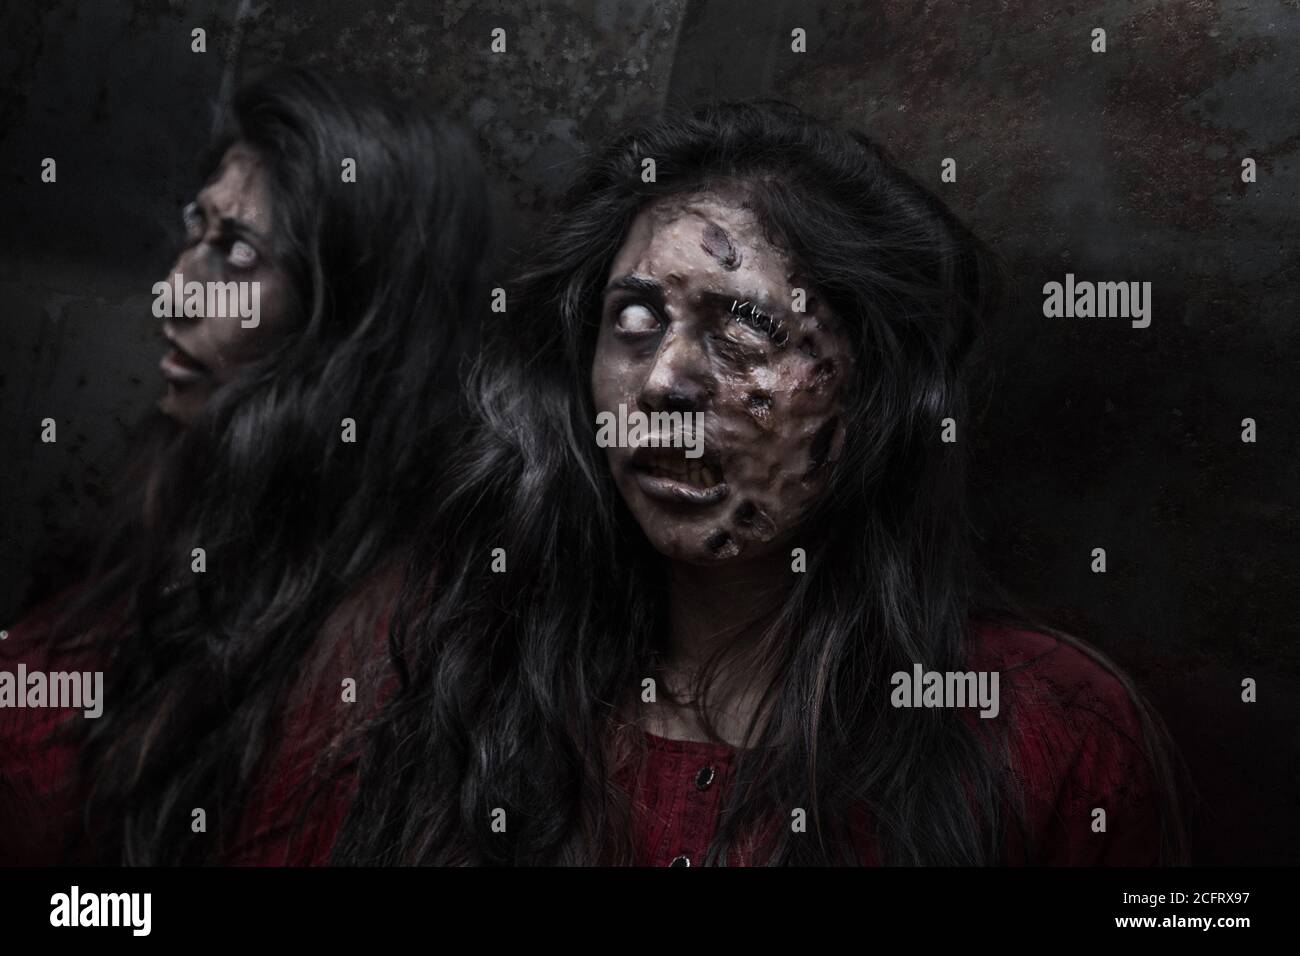 woman with long hair disguised as a zombie, reflecting in a mirror, with dark background, horror Stock Photo